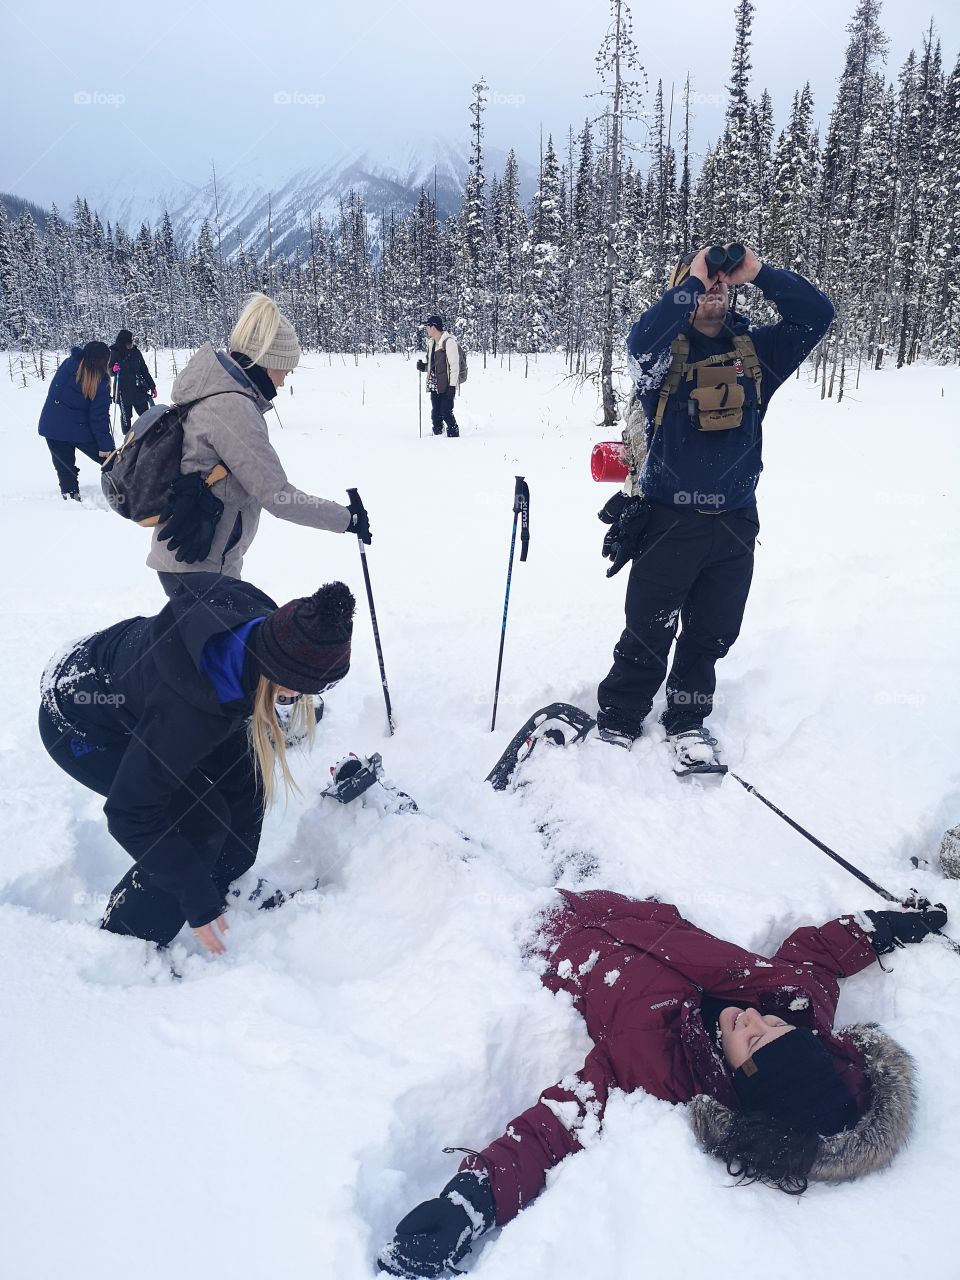 snow shoe in the Canadian Rockies family holiday fun this past Christmas with a group I guided